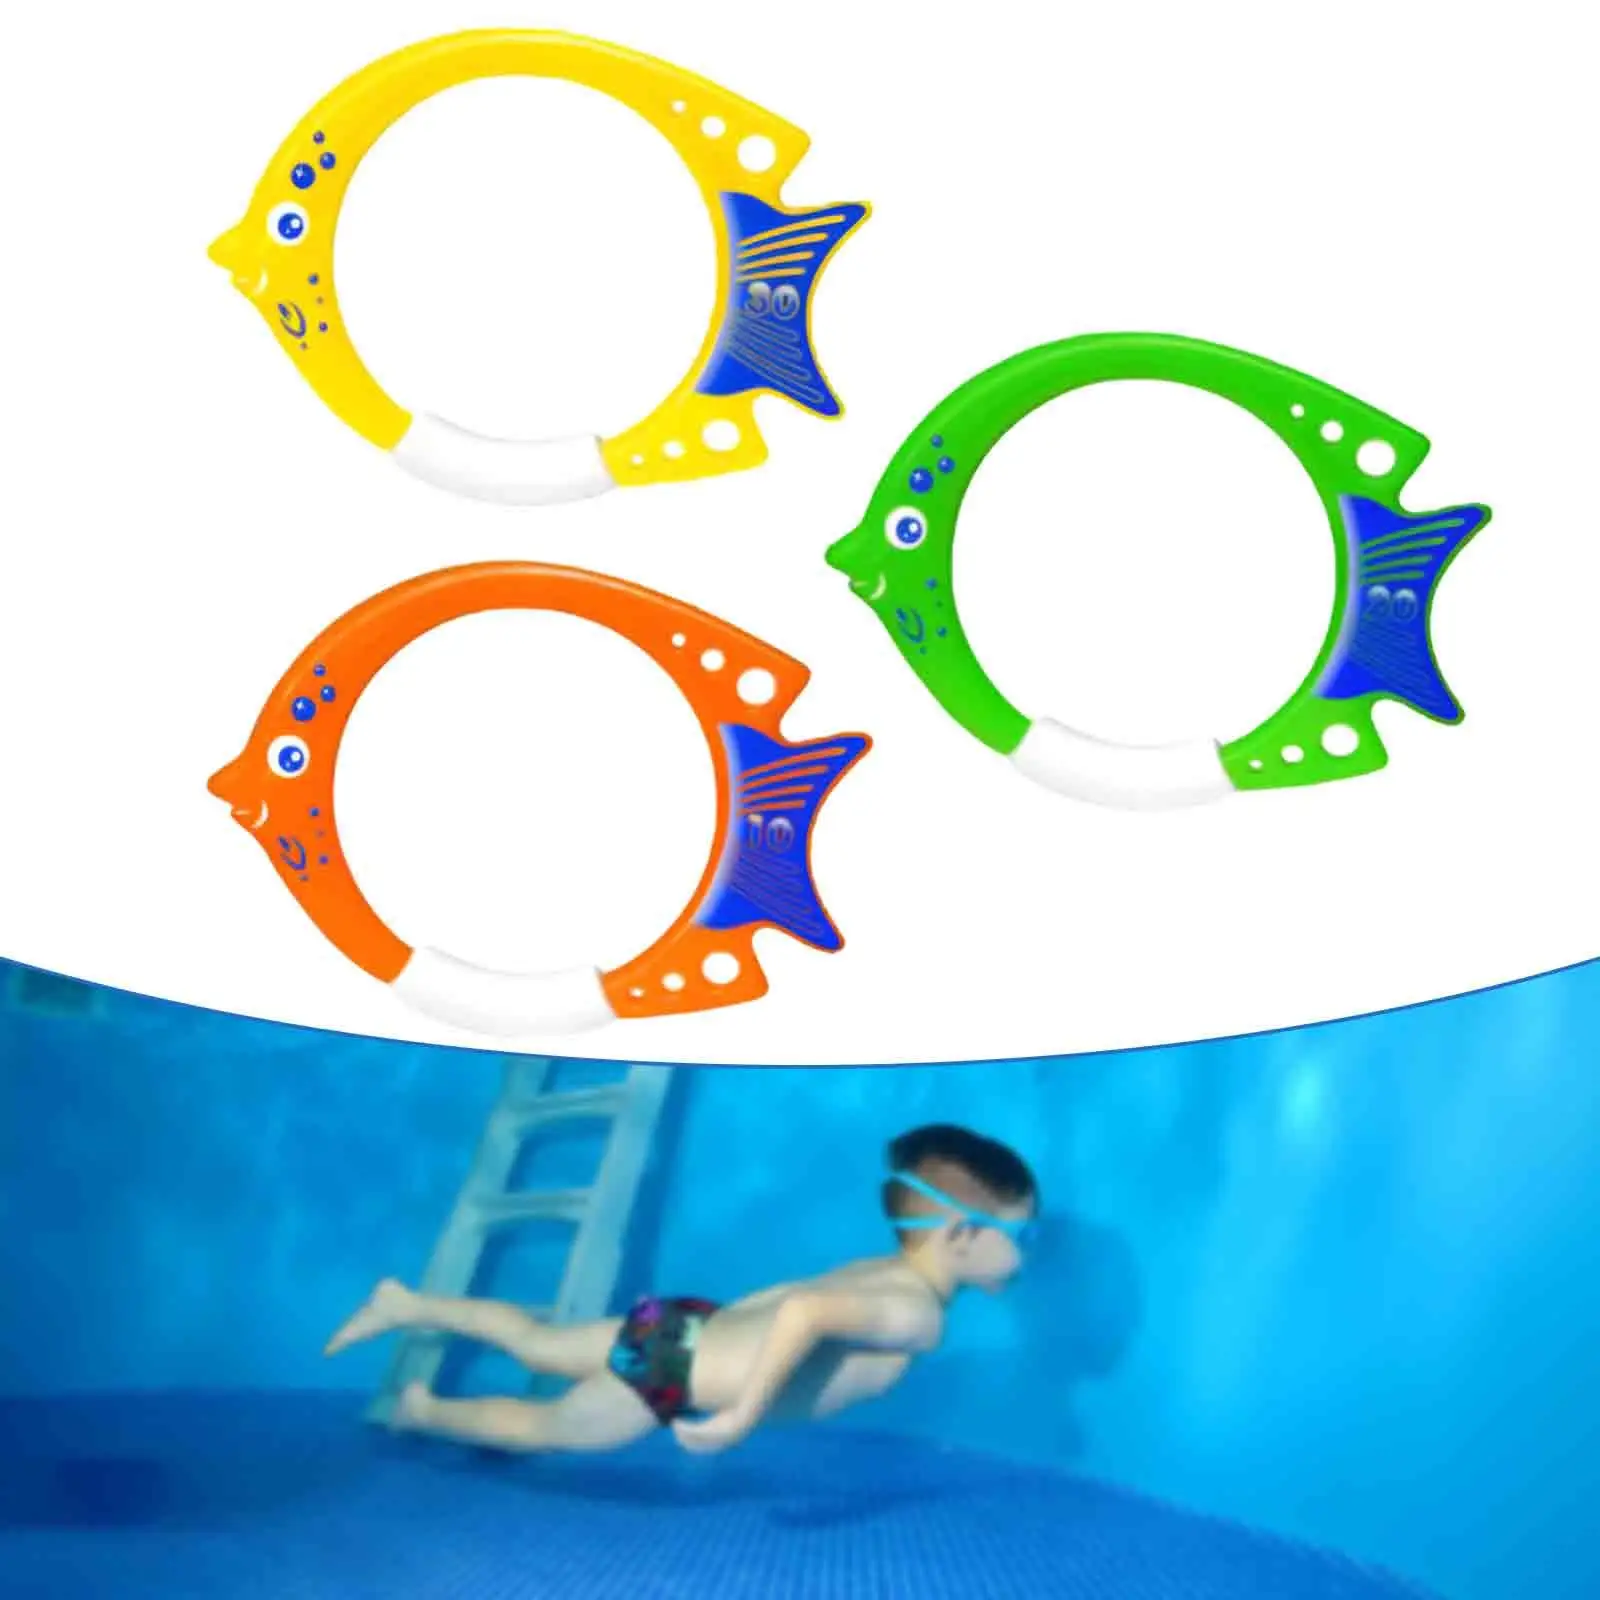 3x Fish Ring Toys Training Equipment Swim Rings Pool Dive Rings Swimming Pool Toys for Aquatic Exercise Water Sports Children